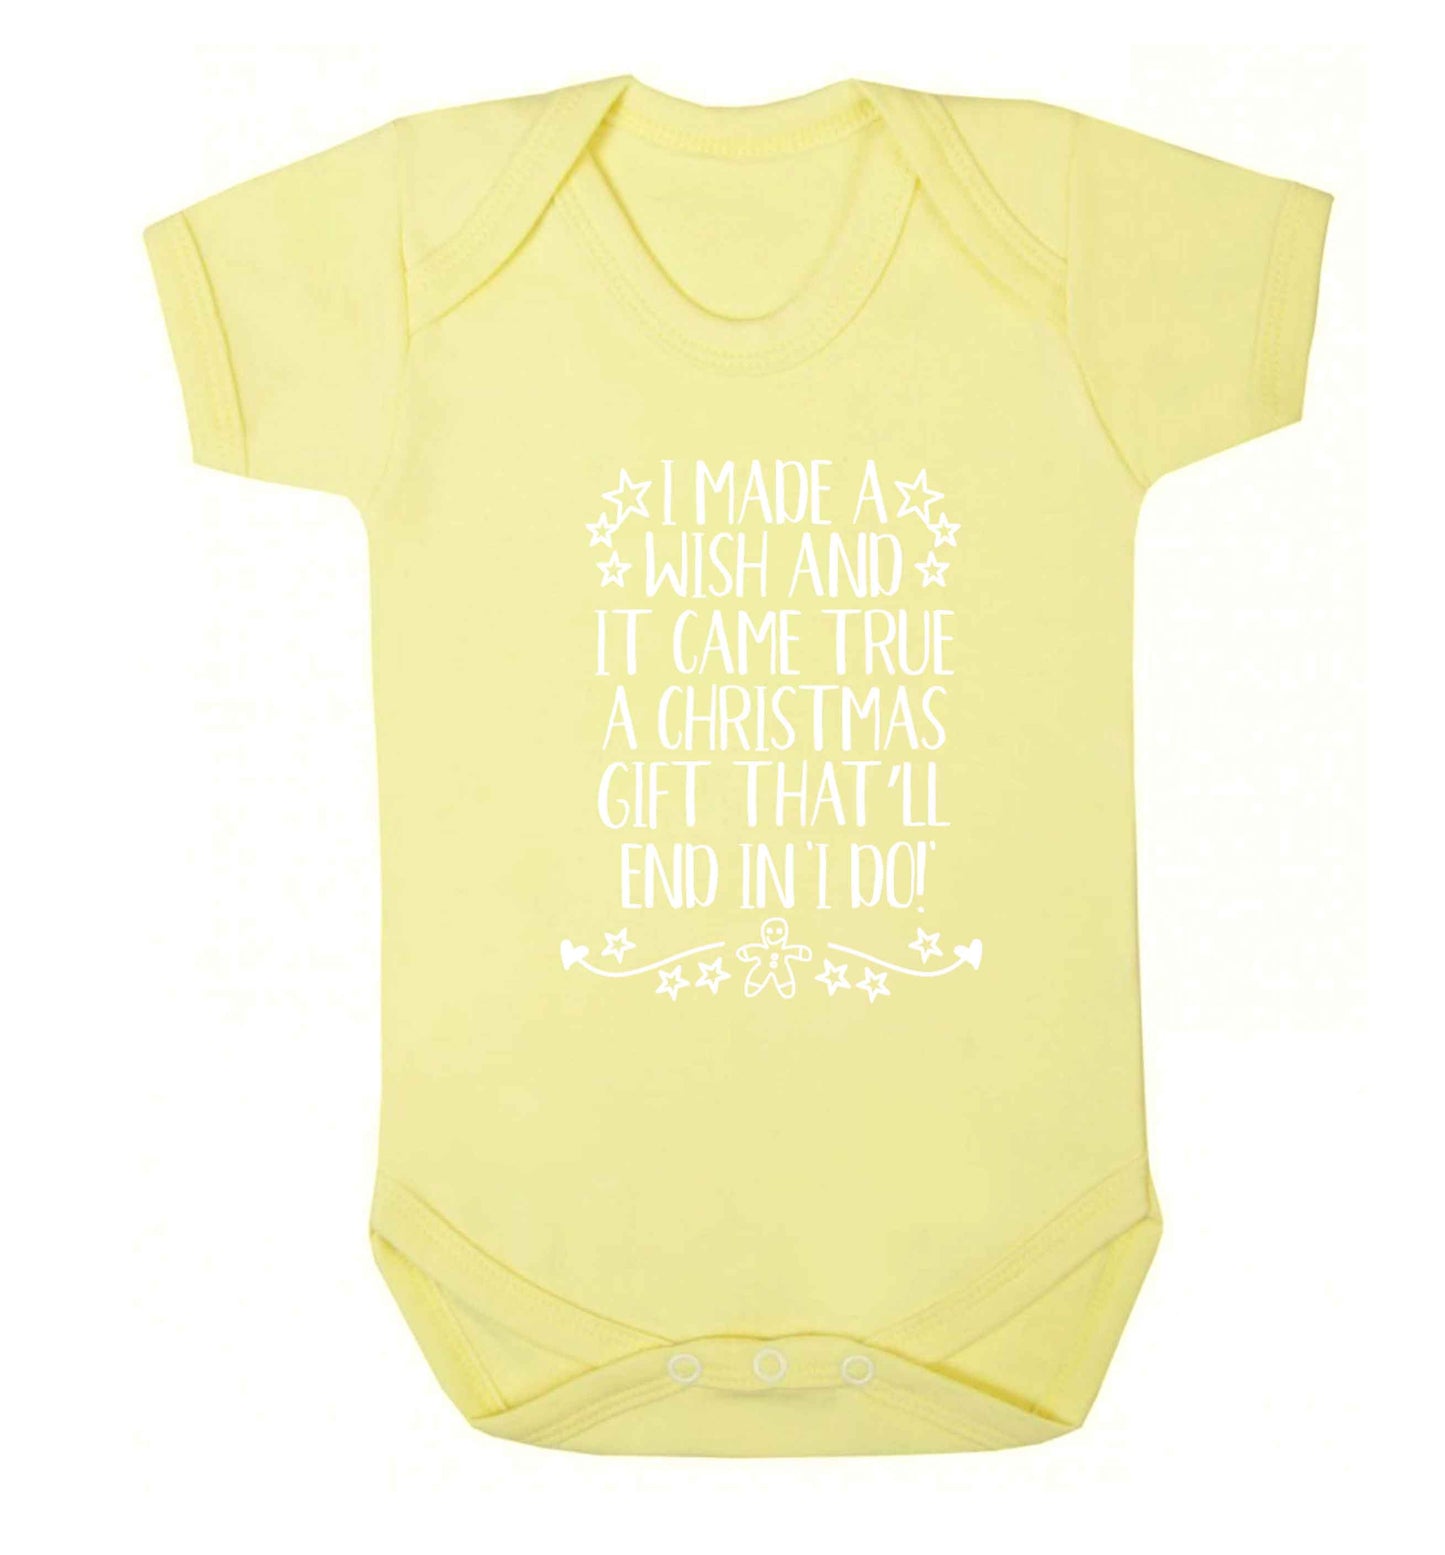 I made a wish and it came true a Christmas gift that'll end in 'I do' Baby Vest pale yellow 18-24 months